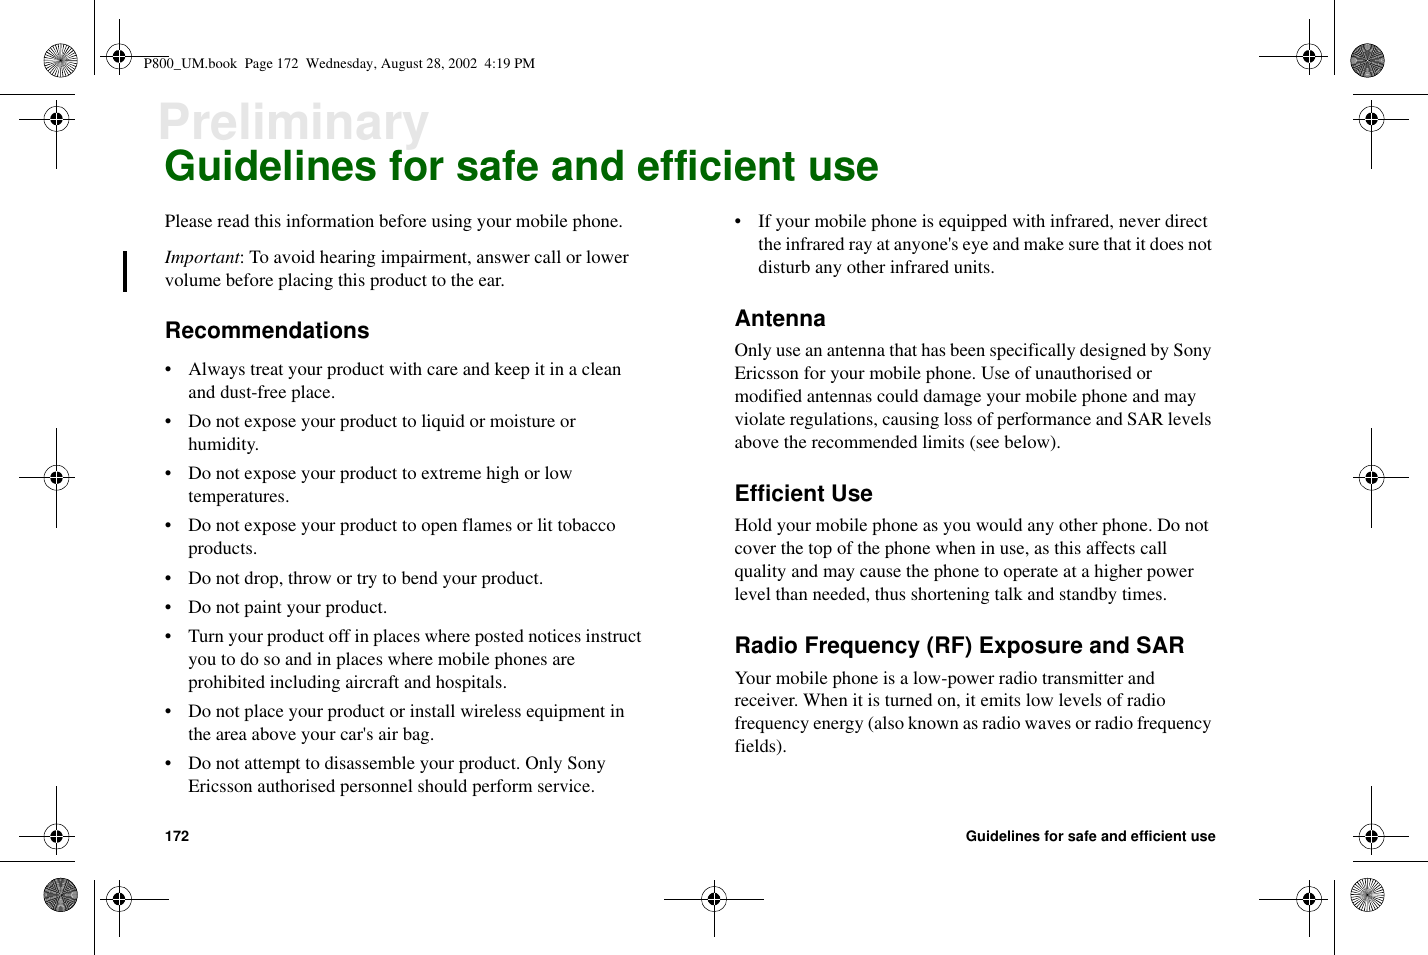 172 Guidelines for safe and efficient usePreliminaryGuidelines for safe and efficient usePlease read this information before using your mobile phone.Important: To avoid hearing impairment, answer call or lowervolume before placing this product to the ear.Recommendations• Always treat your product with care and keep it in a cleanand dust-free place.• Do not expose your product to liquid or moisture orhumidity.• Do not expose your product to extreme high or lowtemperatures.• Do not expose your product to open flames or lit tobaccoproducts.• Do not drop, throw or try to bend your product.• Do not paint your product.• Turn your product off in places where posted notices instructyou to do so and in places where mobile phones areprohibited including aircraft and hospitals.• Do not place your product or install wireless equipment inthe area above your car&apos;s air bag.• Do not attempt to disassemble your product. Only SonyEricsson authorised personnel should perform service.• If your mobile phone is equipped with infrared, never directthe infrared ray at anyone&apos;s eye and make sure that it does notdisturb any other infrared units.AntennaOnly use an antenna that has been specifically designed by SonyEricsson for your mobile phone. Use of unauthorised ormodified antennas could damage your mobile phone and mayviolate regulations, causing loss of performance and SAR levelsabove the recommended limits (see below).Efficient UseHold your mobile phone as you would any other phone. Do notcover the top of the phone when in use, as this affects callquality and may cause the phone to operate at a higher powerlevel than needed, thus shortening talk and standby times.Radio Frequency (RF) Exposure and SARYour mobile phone is a low-power radio transmitter andreceiver. When it is turned on, it emits low levels of radiofrequency energy (also known as radio waves or radio frequencyfields).P800_UM.book Page 172 Wednesday, August 28, 2002 4:19 PM